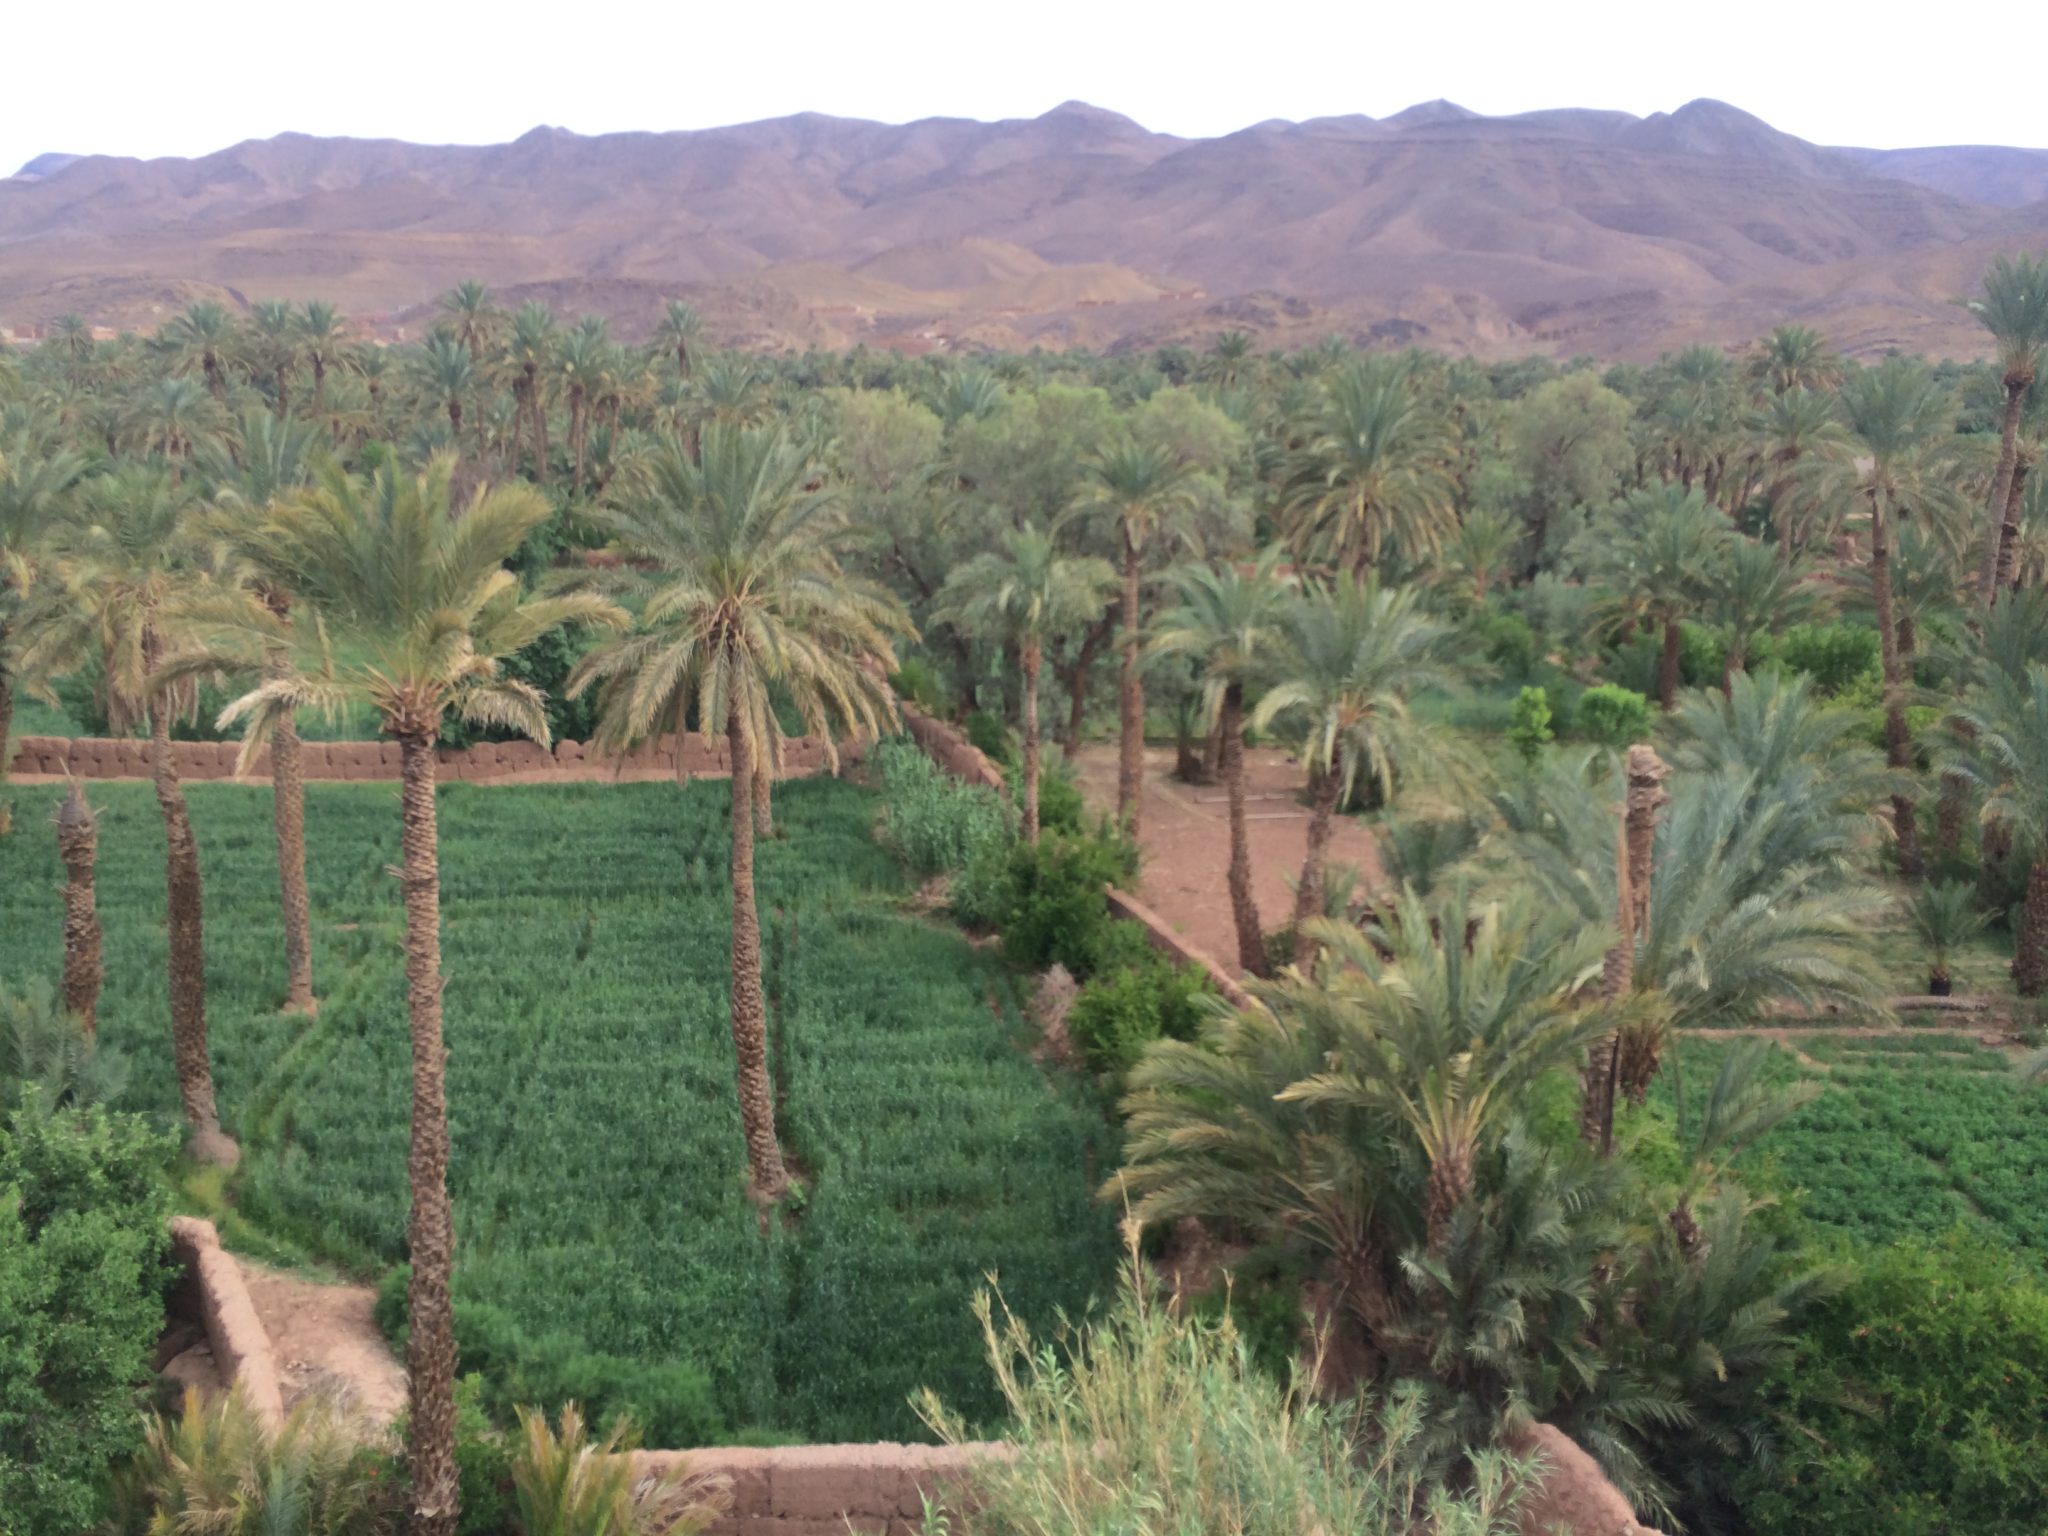 Dra Valley, Morocco; Lush green palm groves and wheat against backdrop of mountains